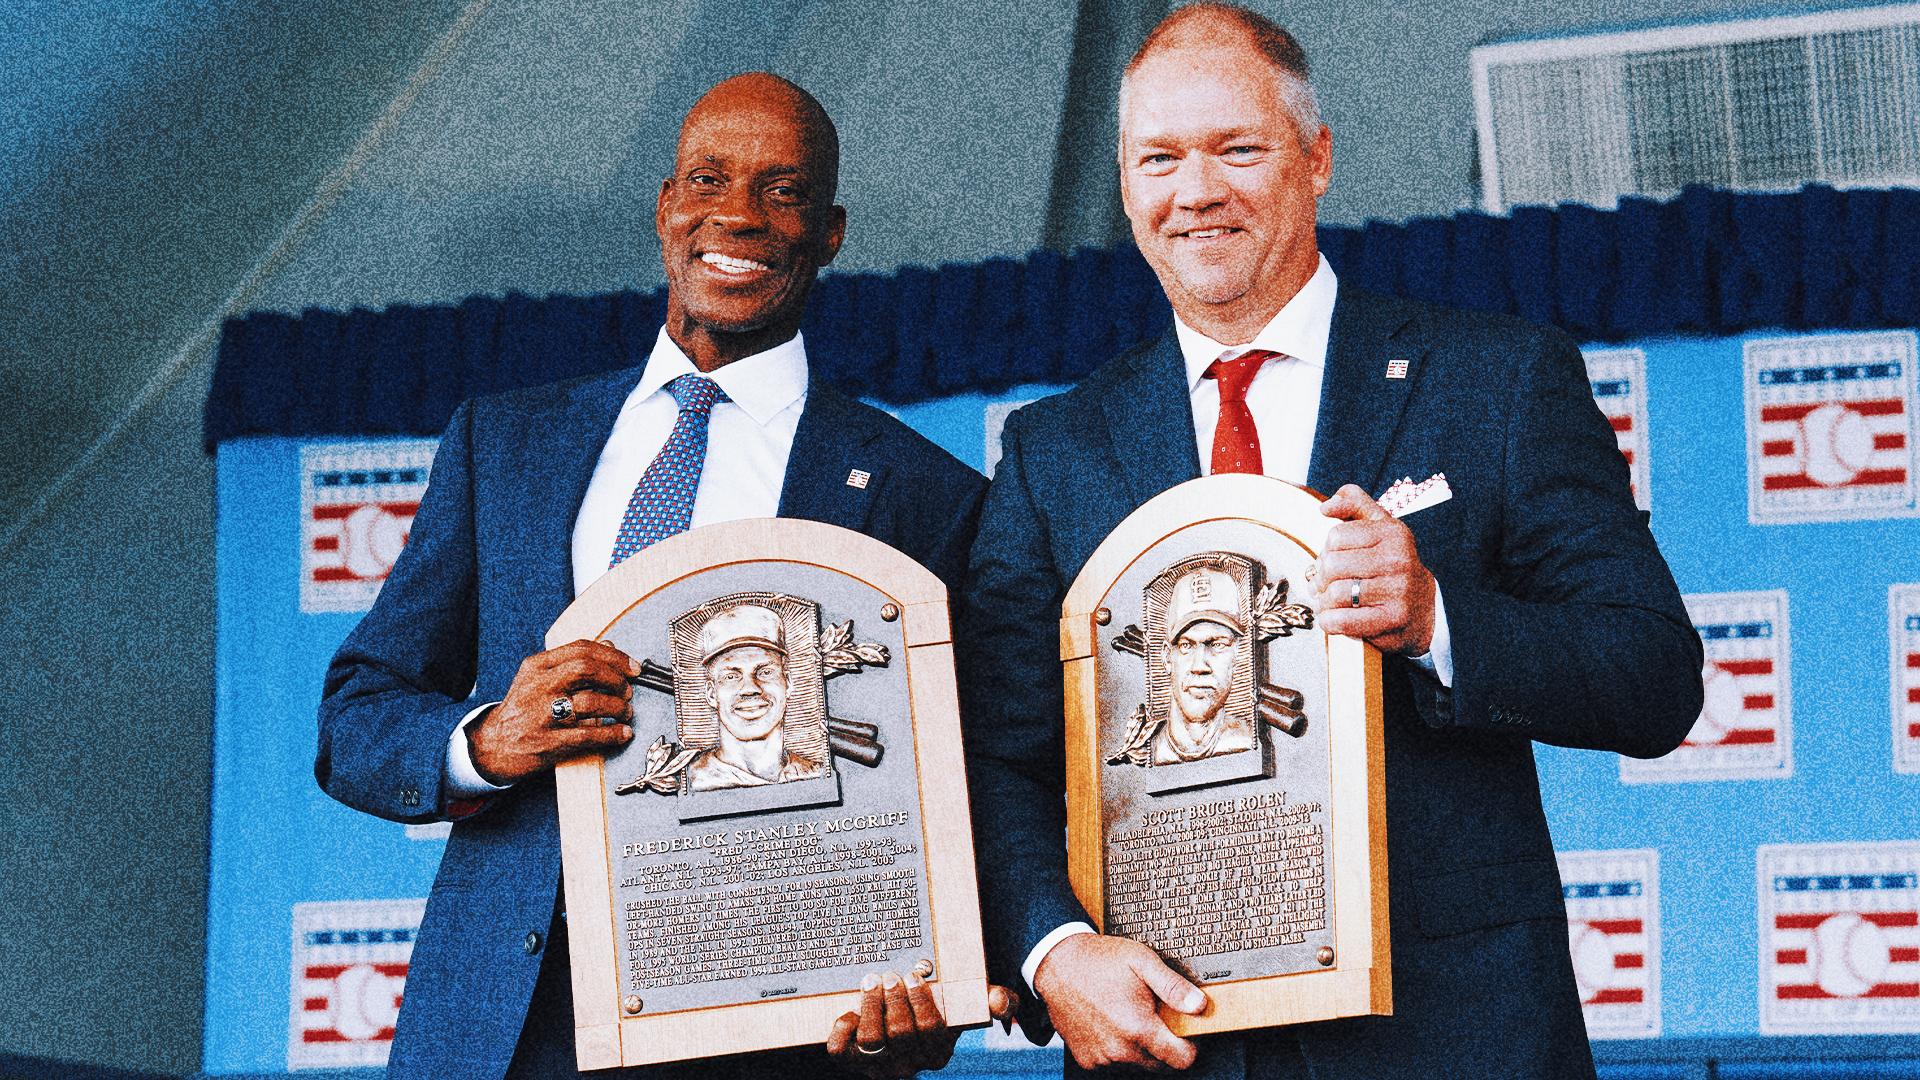 Scott Rolen credits his parents, Fred McGriff thanks fellow players at Hall of Fame induction